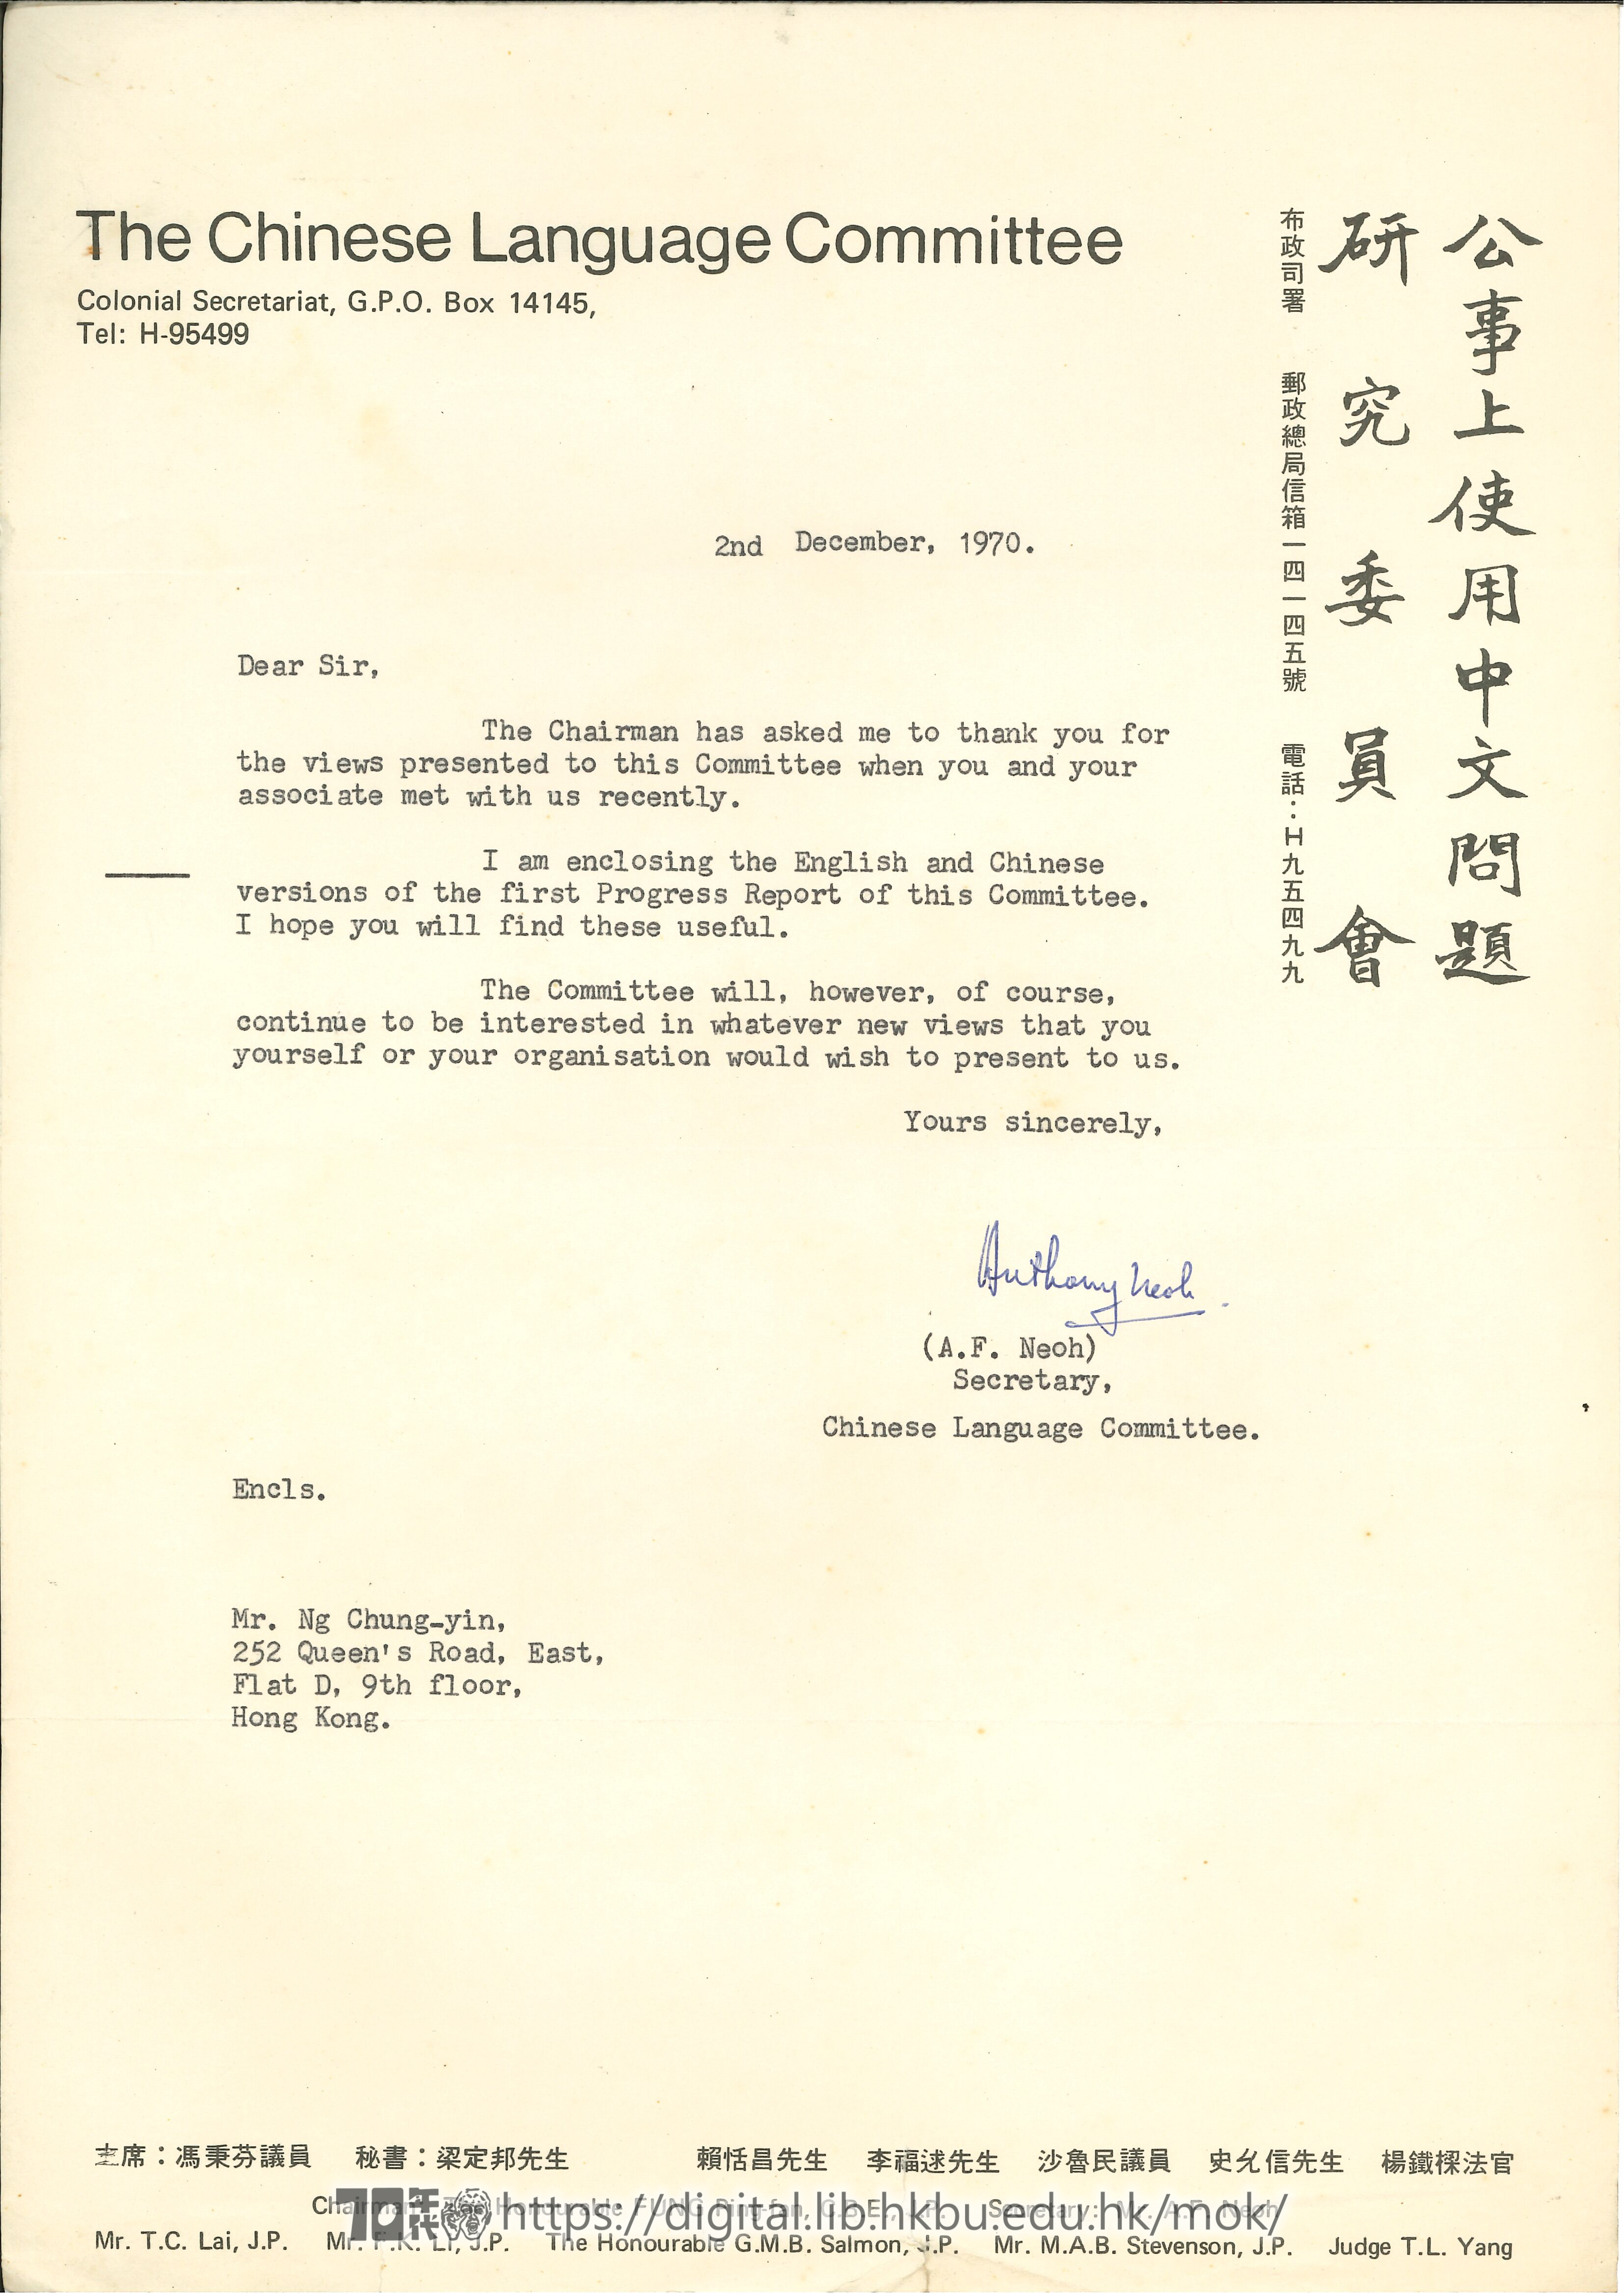   Letter from A.F. Neoh (Government Chinese Language Committee) to Ng Chung Yin  